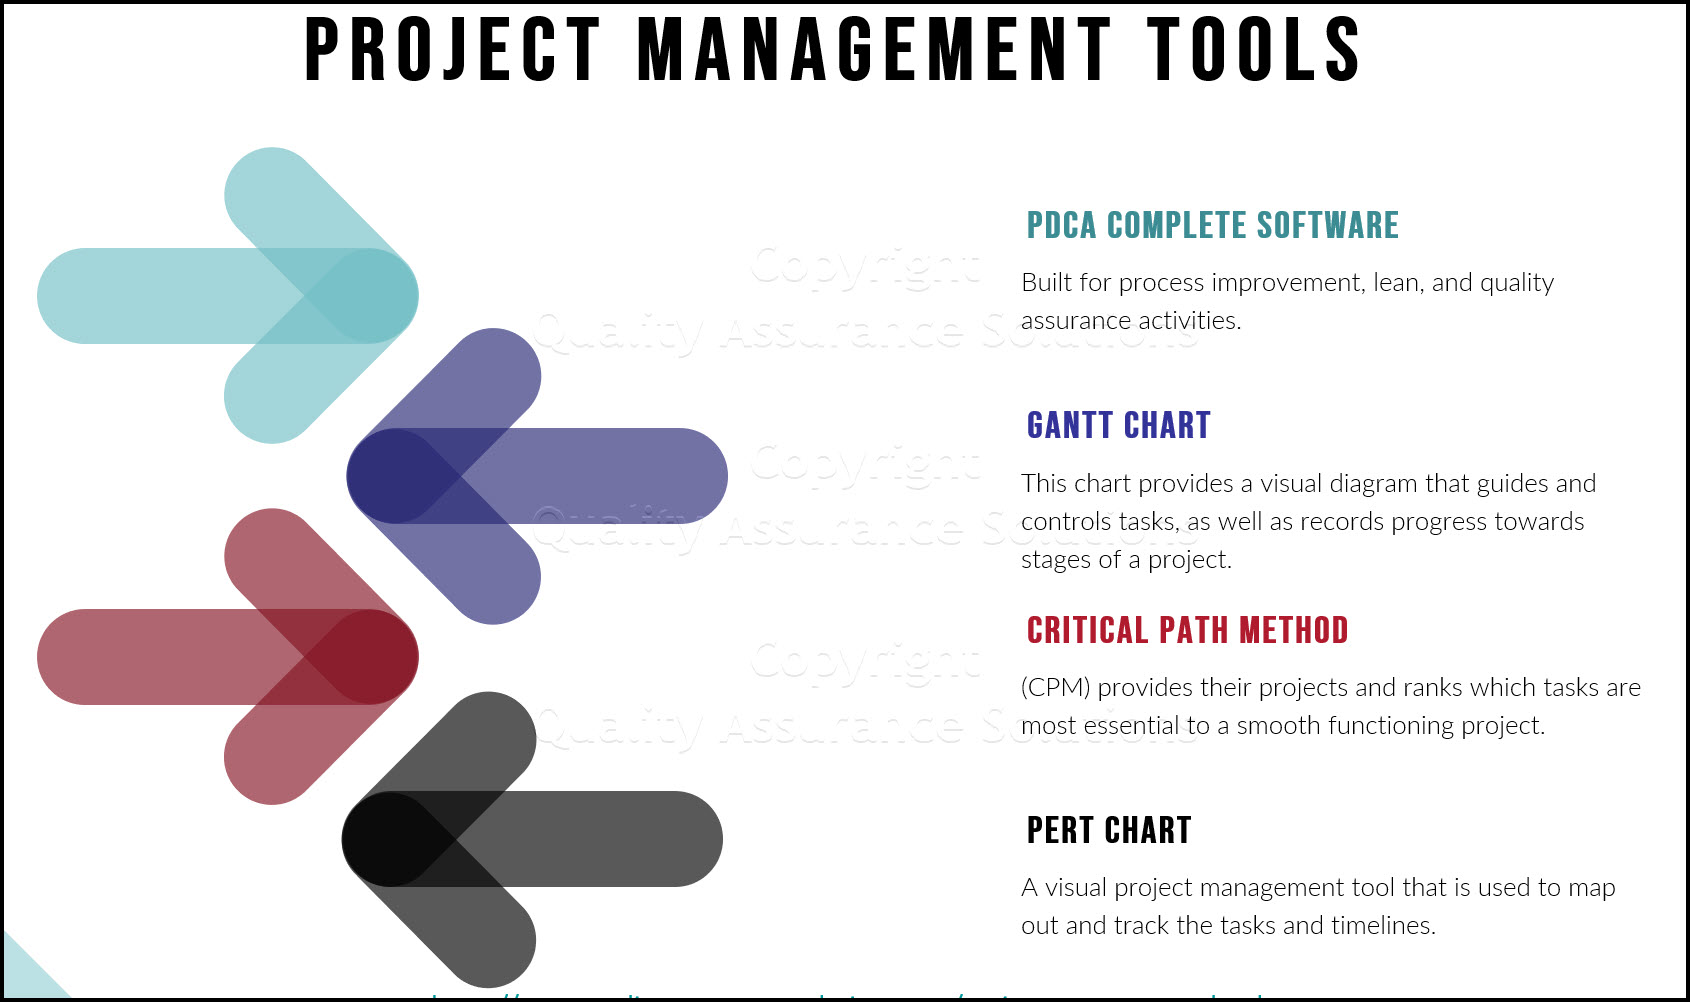 Successful project management is about doing the right tasks, in the right order, using the right process. Get your team's projects done the right way.